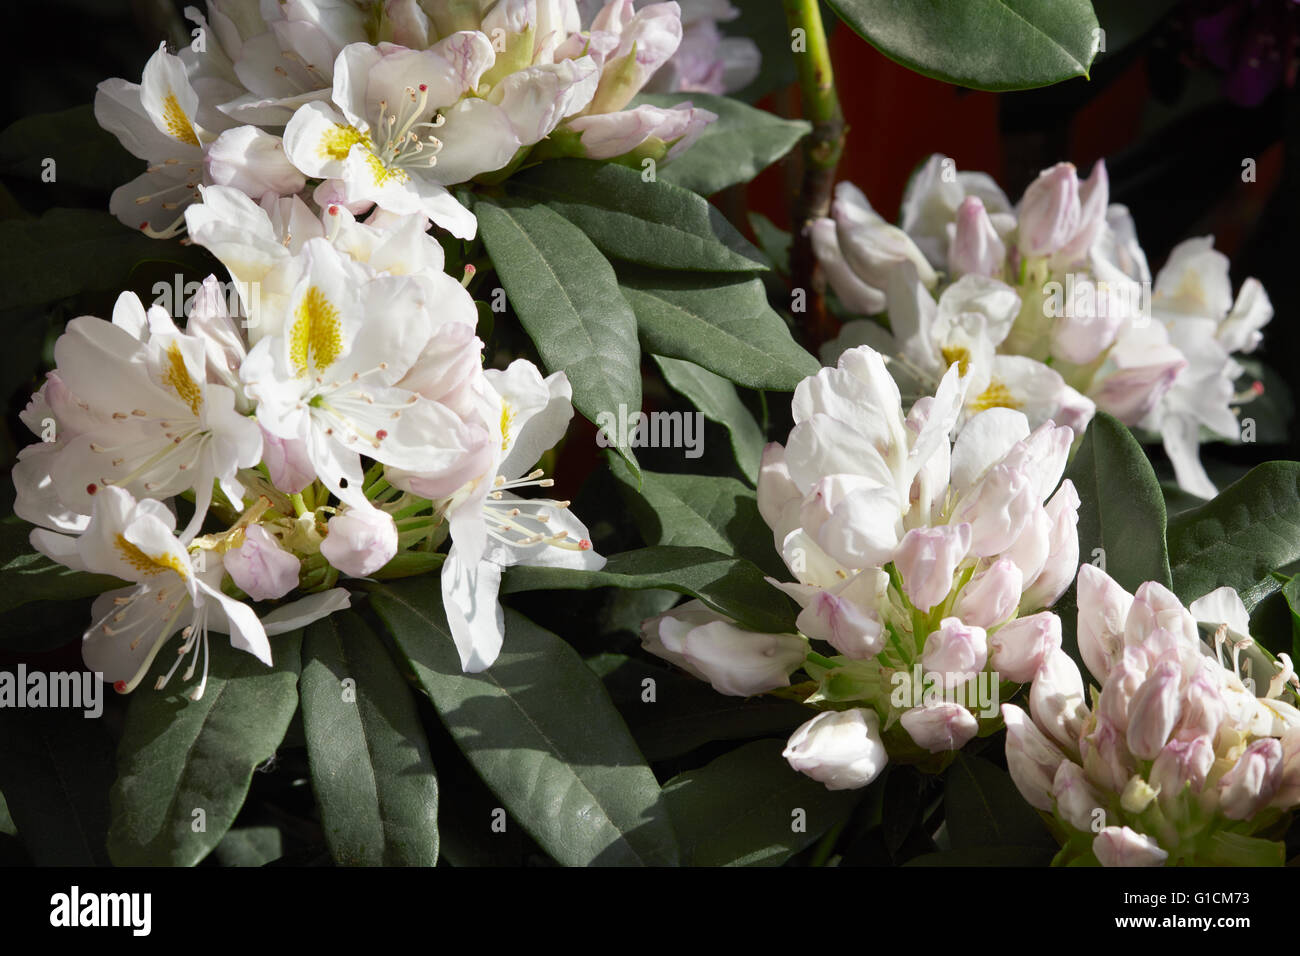 Rhododendron white flowers background in sunlight Stock Photo